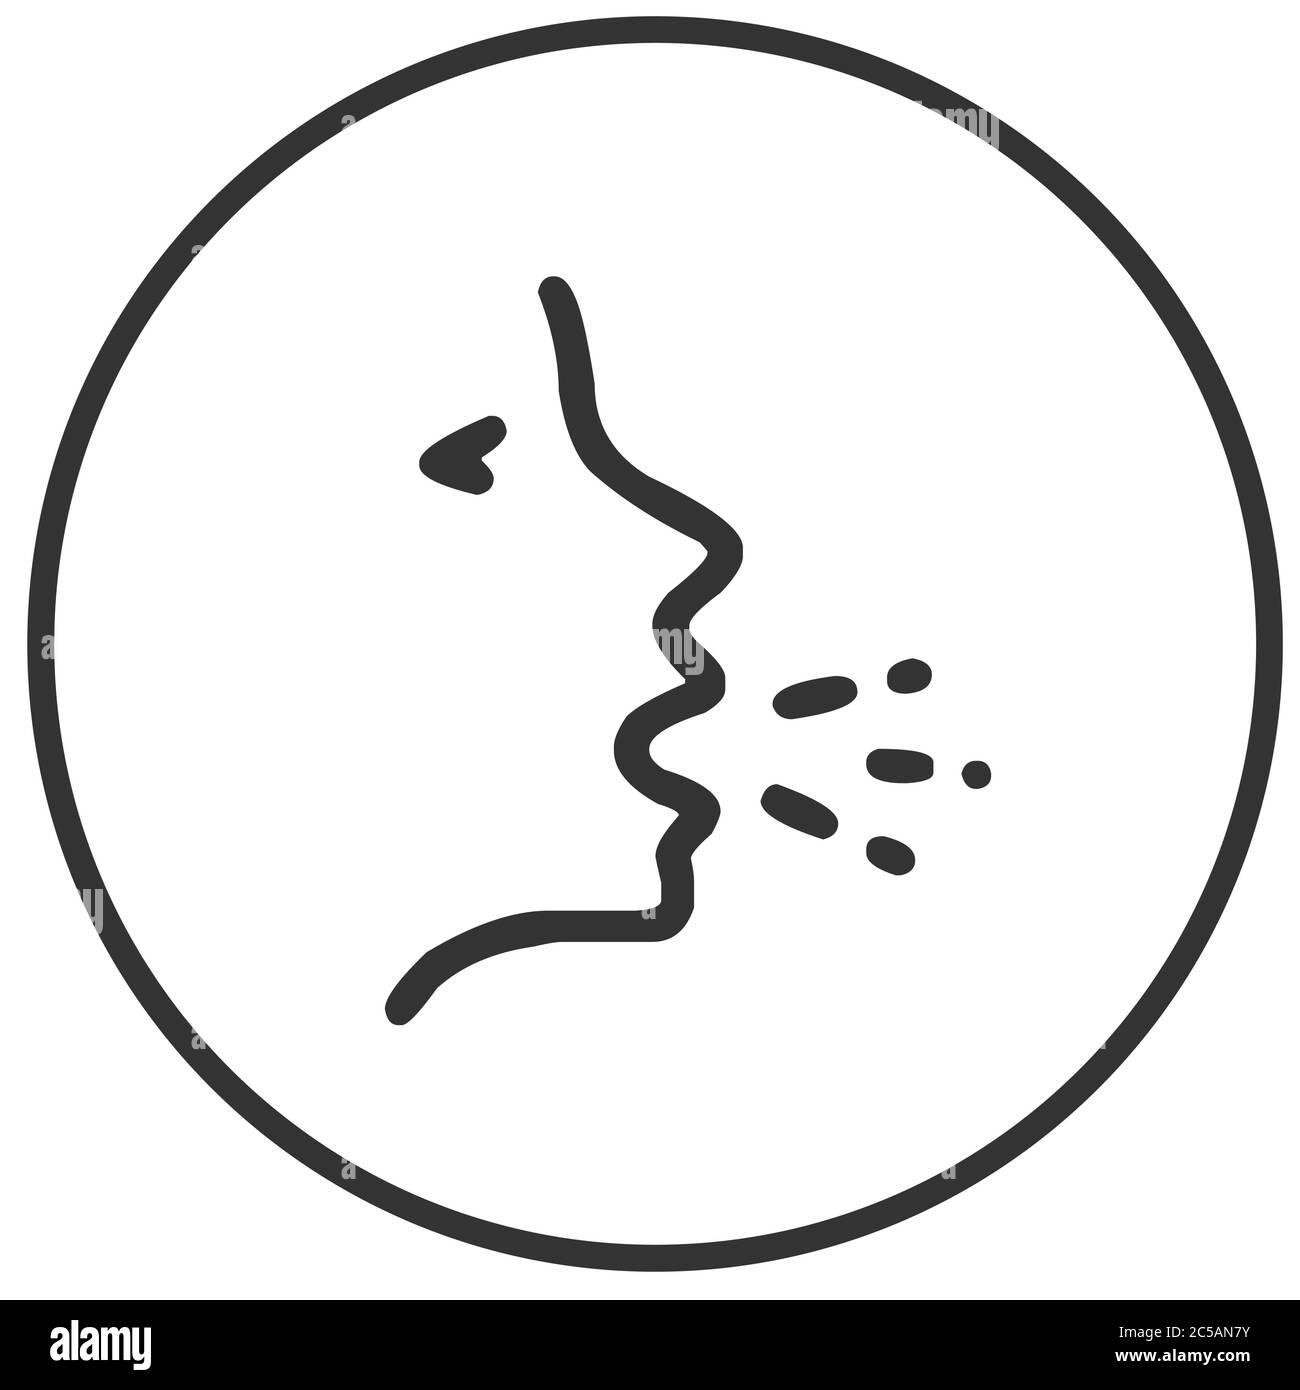 Man coughing icon vector illustration. Symptom of virus Stock Vector